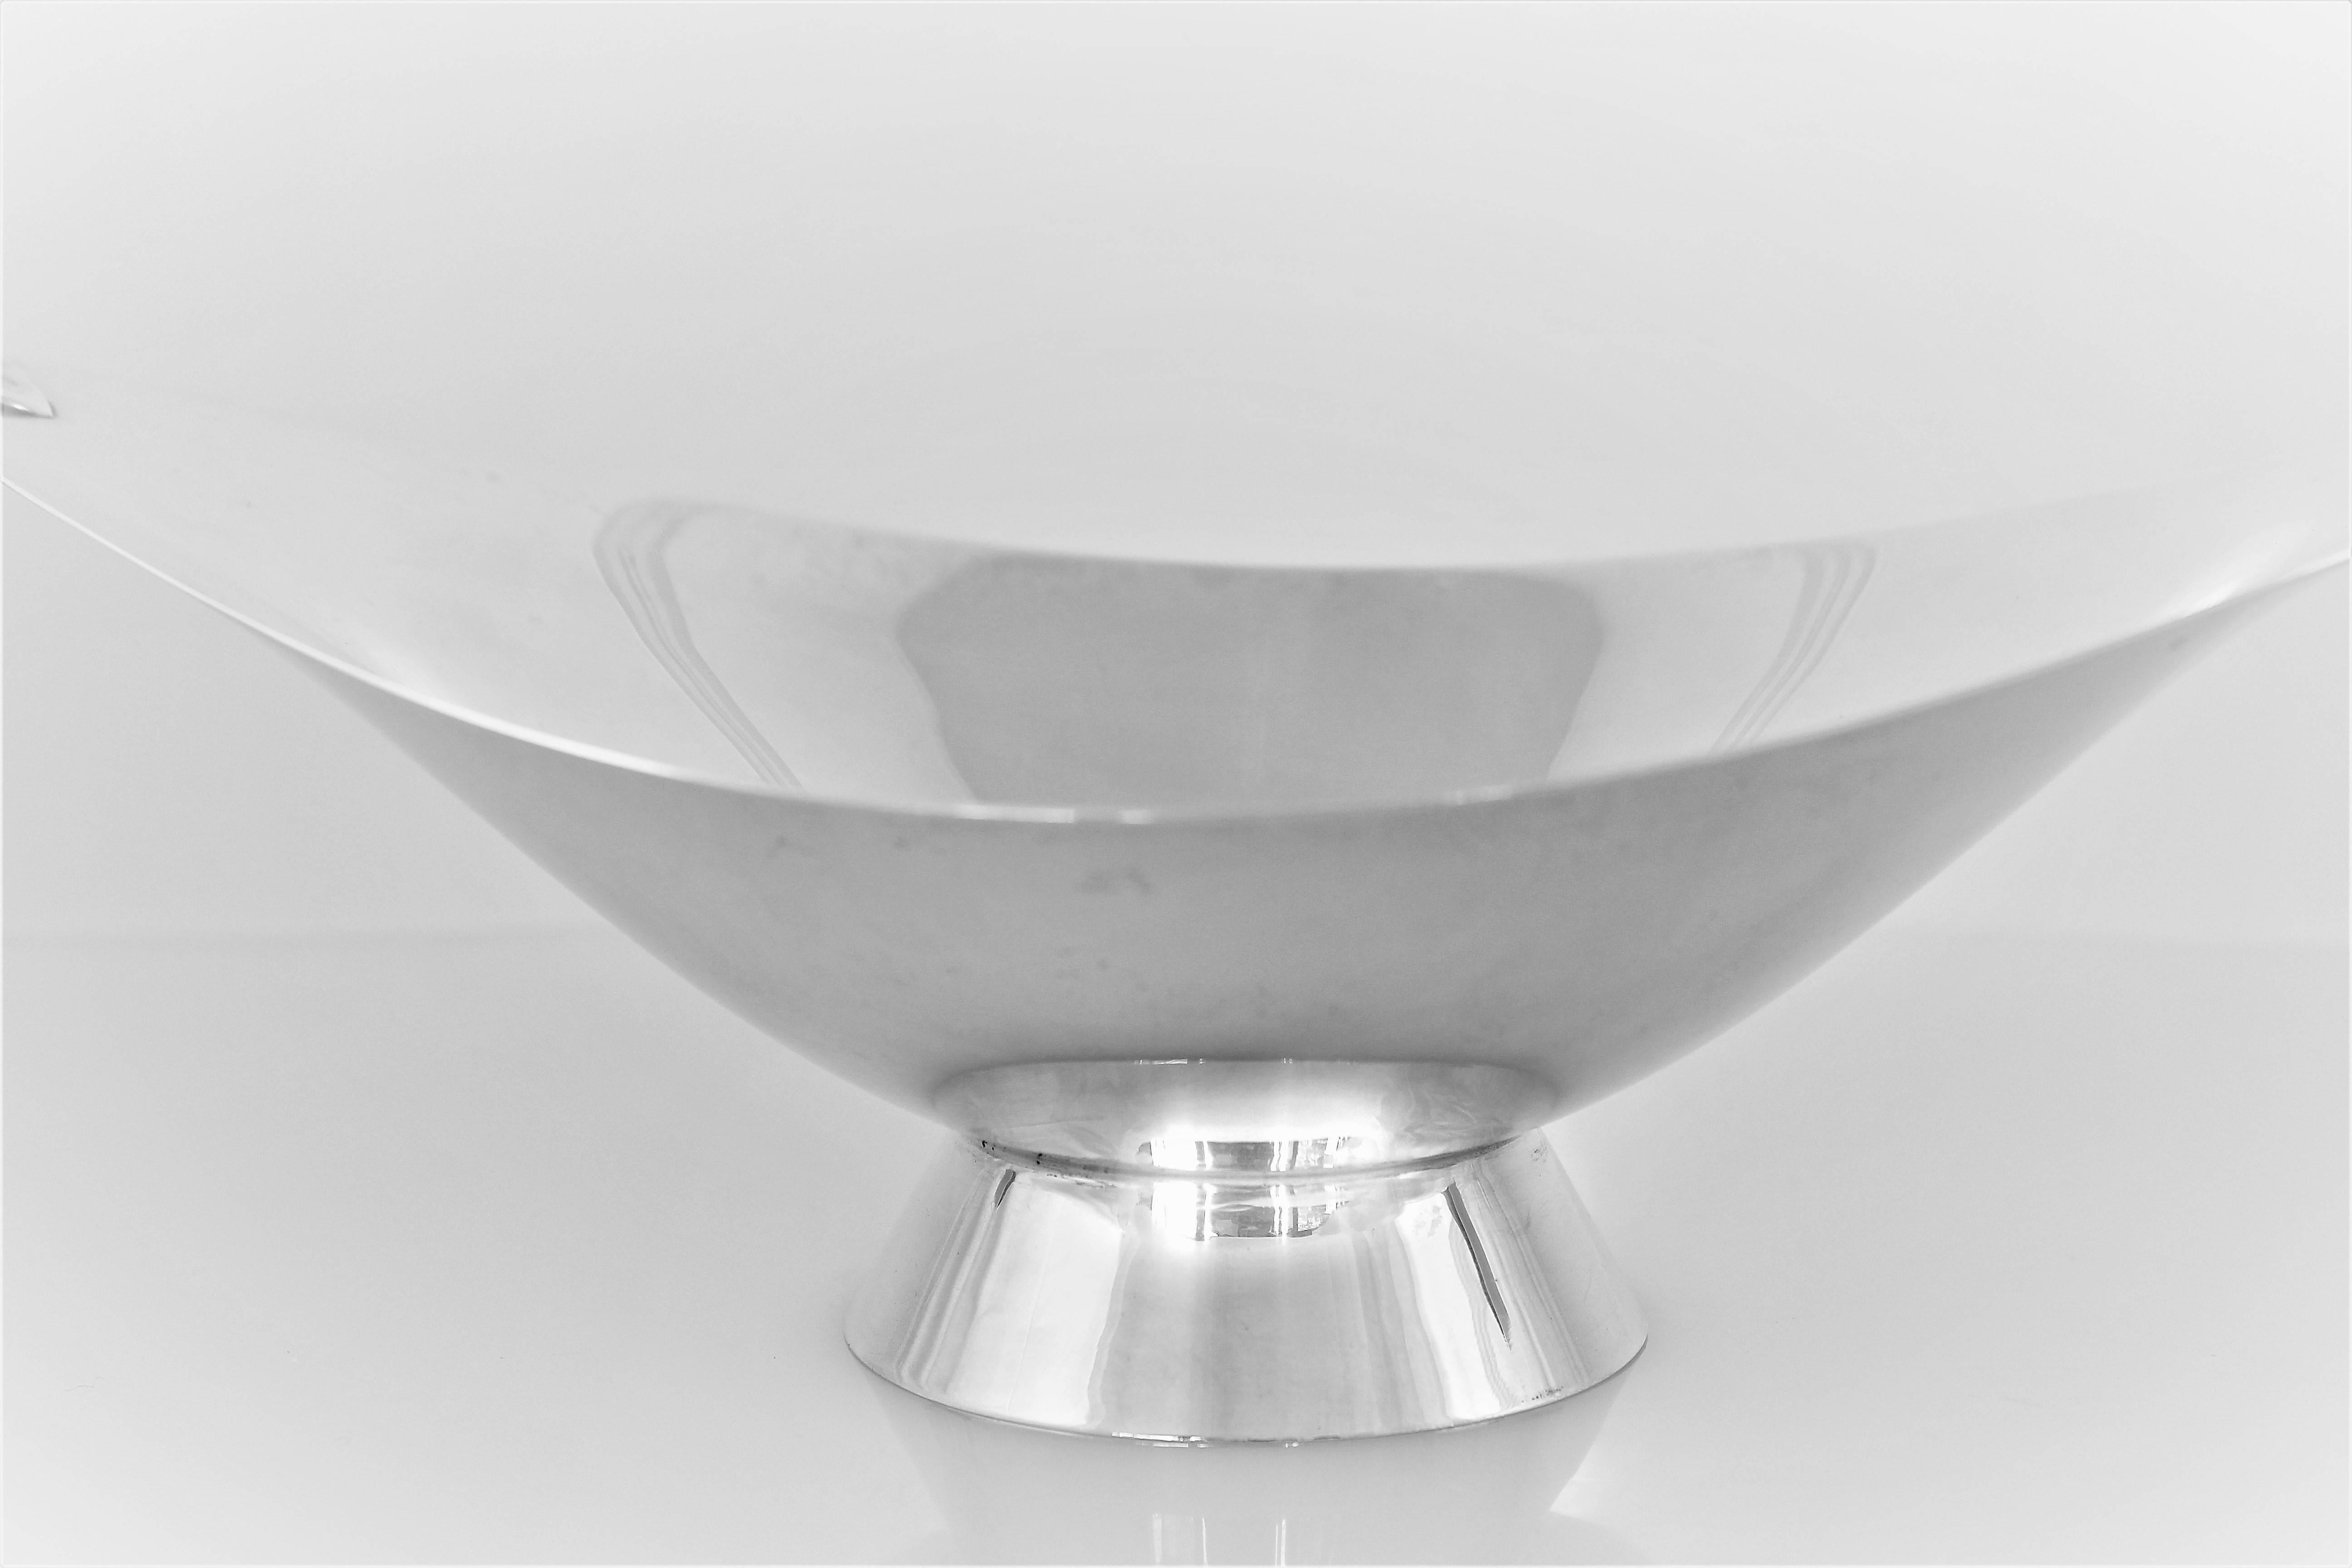 Modern, Mid-Century and minimal... this handsome sterling dish by Tiffany & Co., has handles on each side and sits on a base. It has a tailored shape and would look wonderful in any decor.